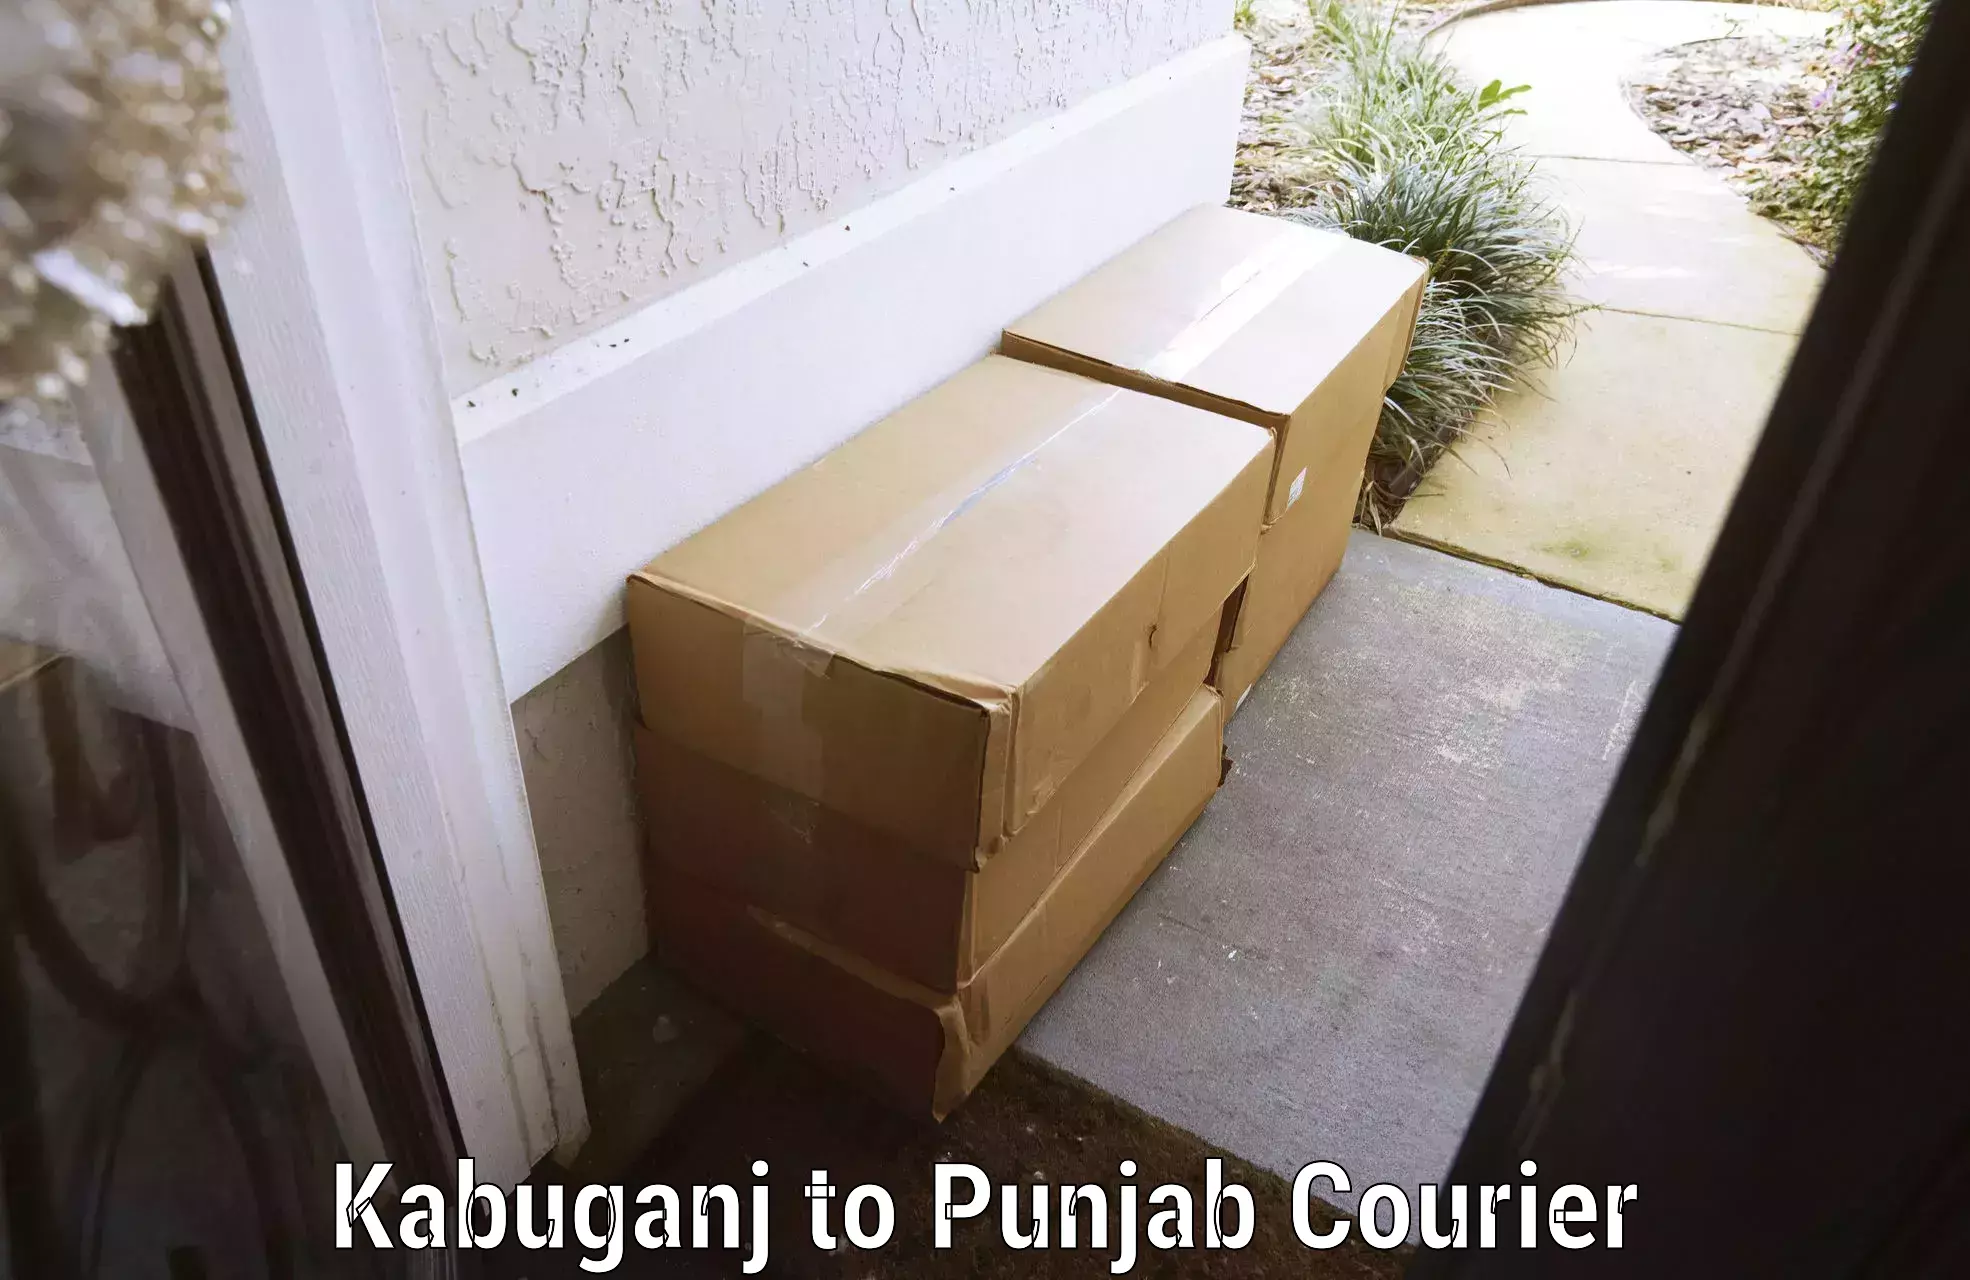 Luggage delivery solutions Kabuganj to Patiala